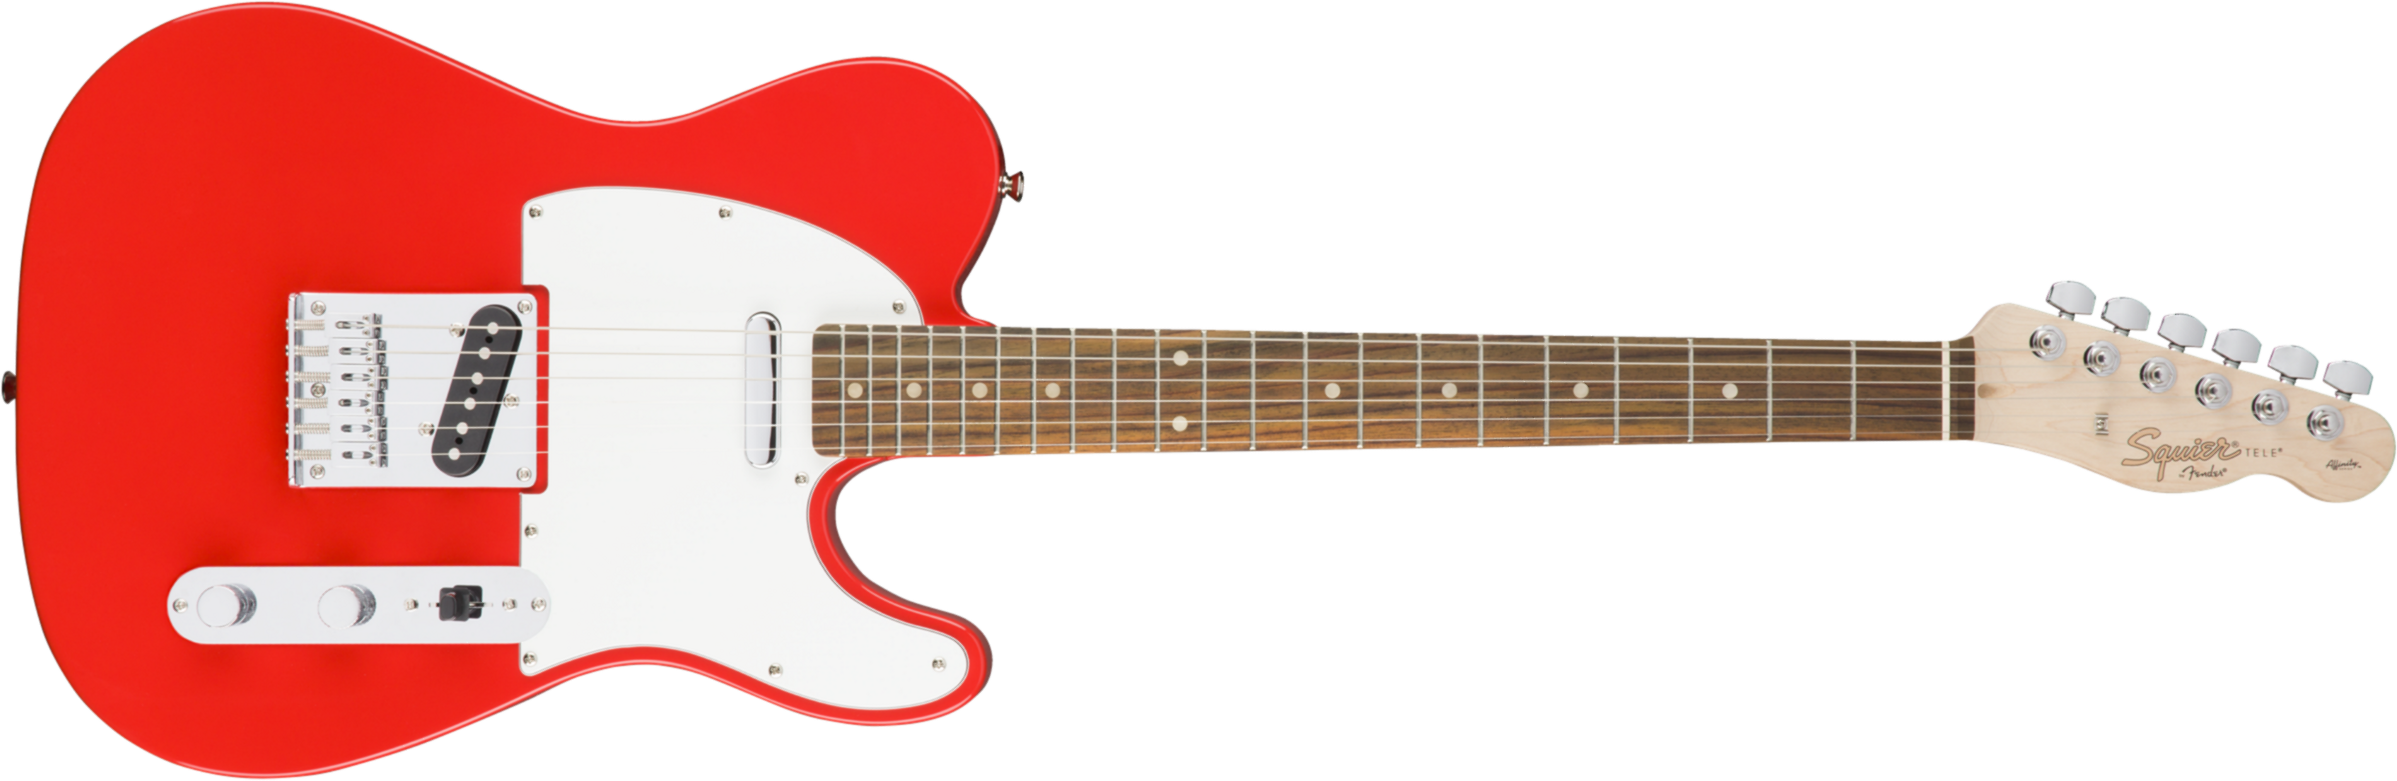 Squier Tele Affinity Series 2019 Lau - Race Red - Tel shape electric guitar - Main picture